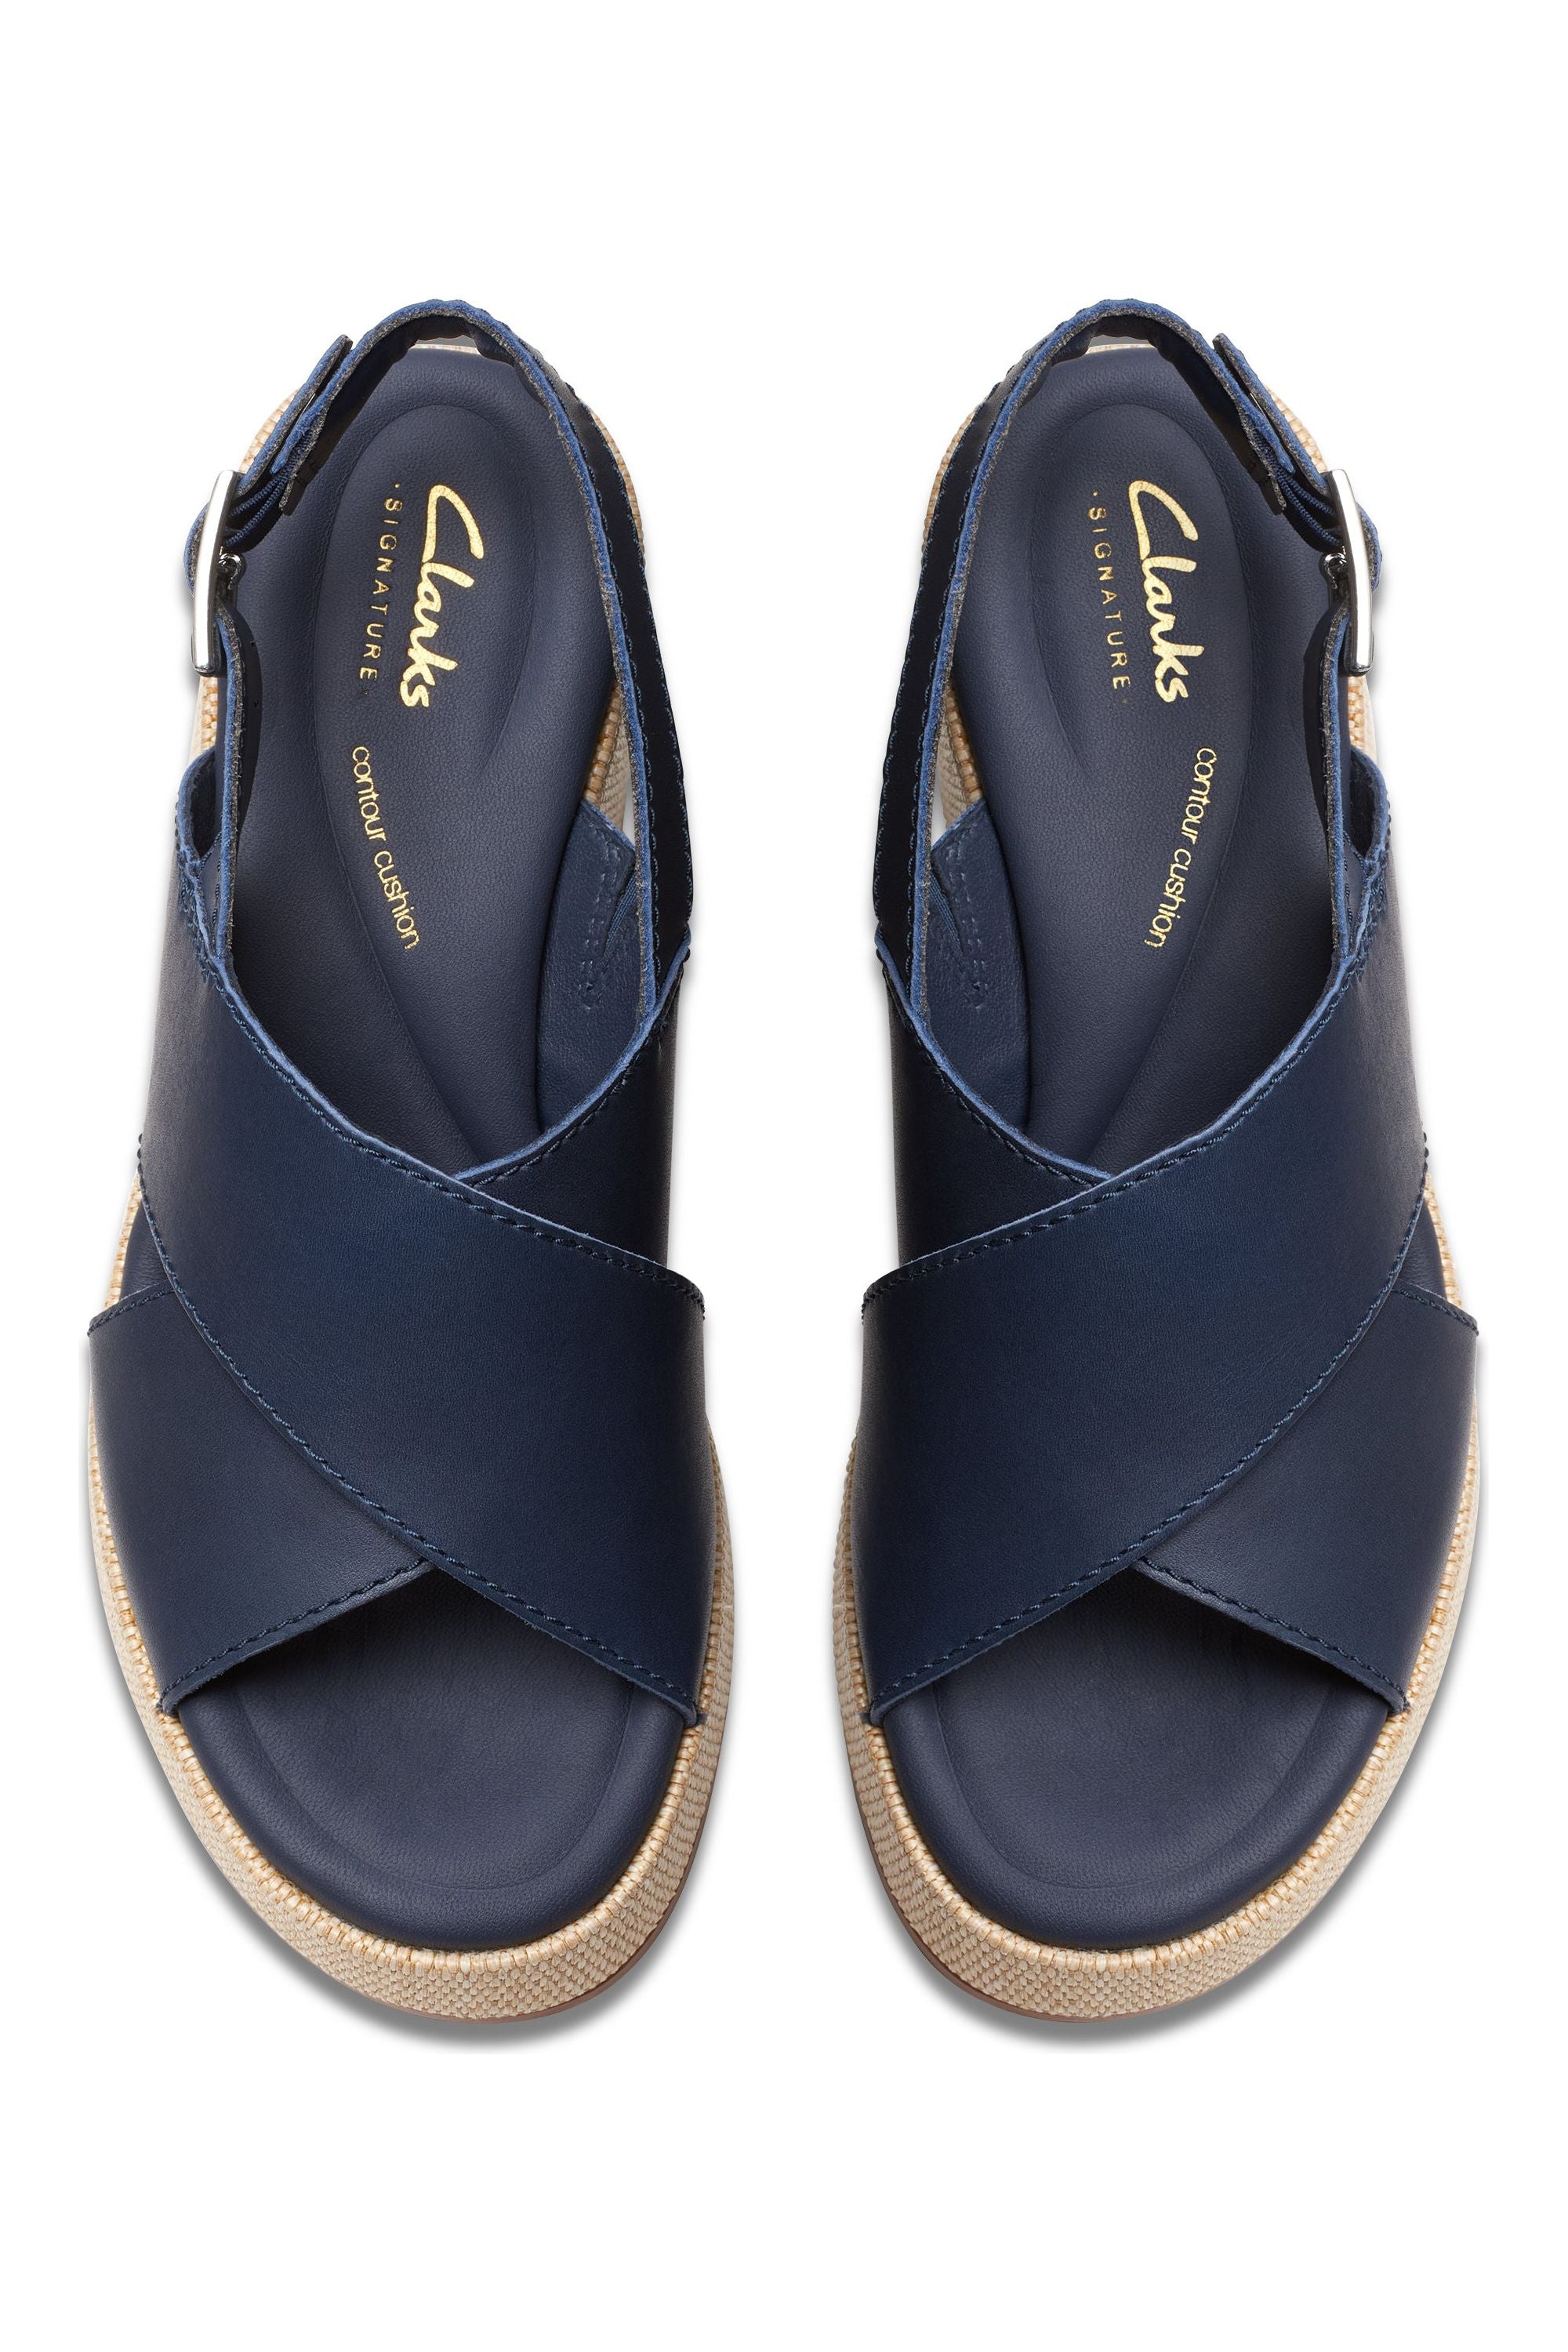 Clarks Manon Wish in Navy Leather